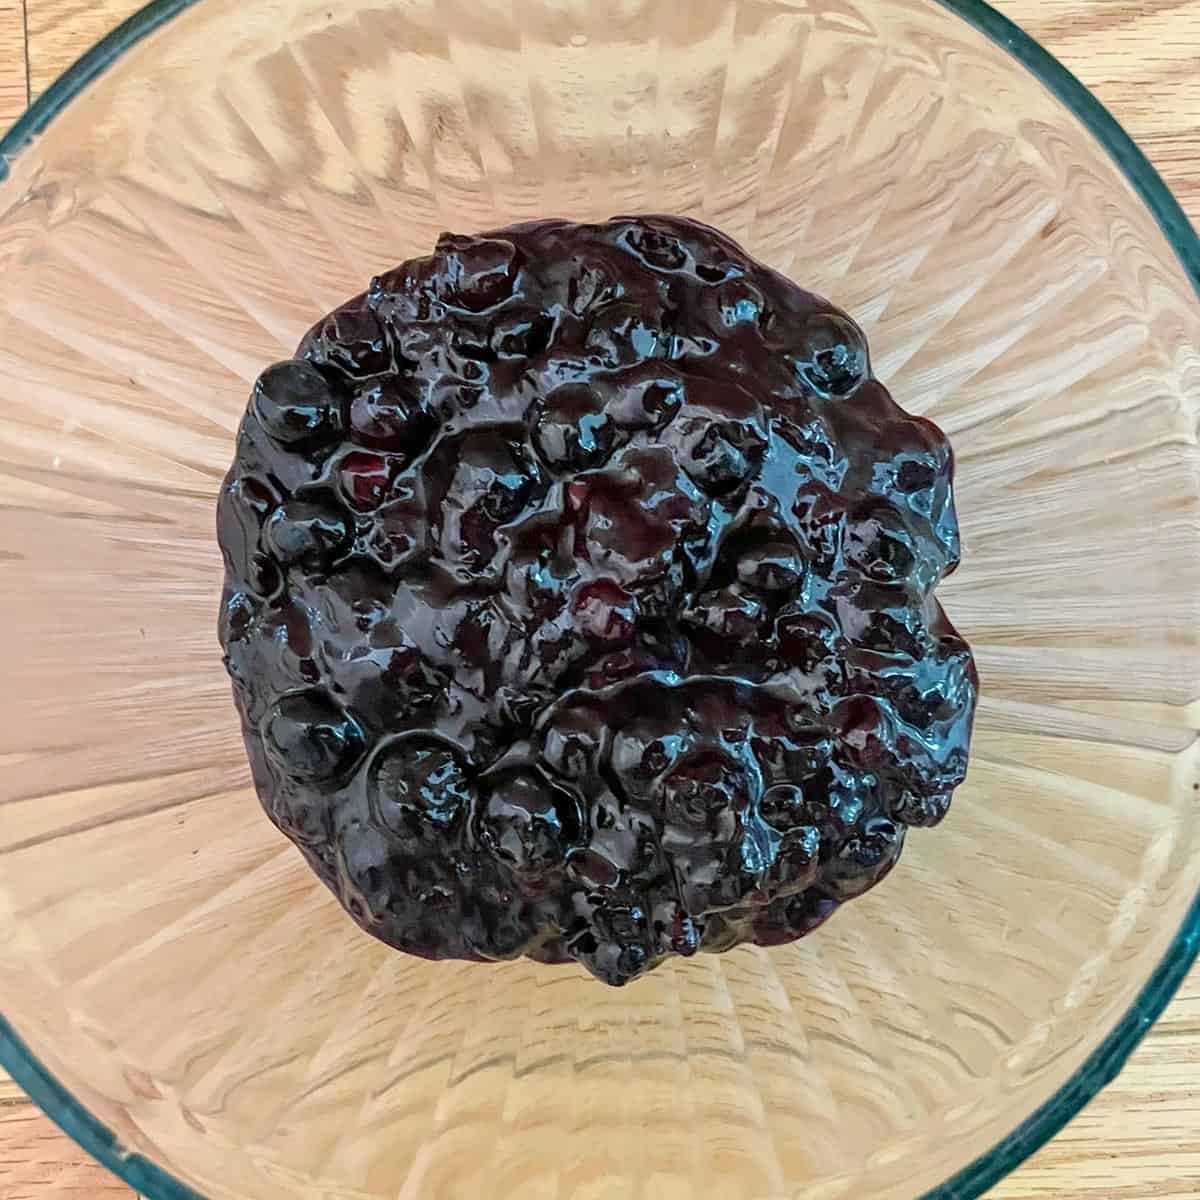 After whole blueberries are added to the cooled cooked blueberries.